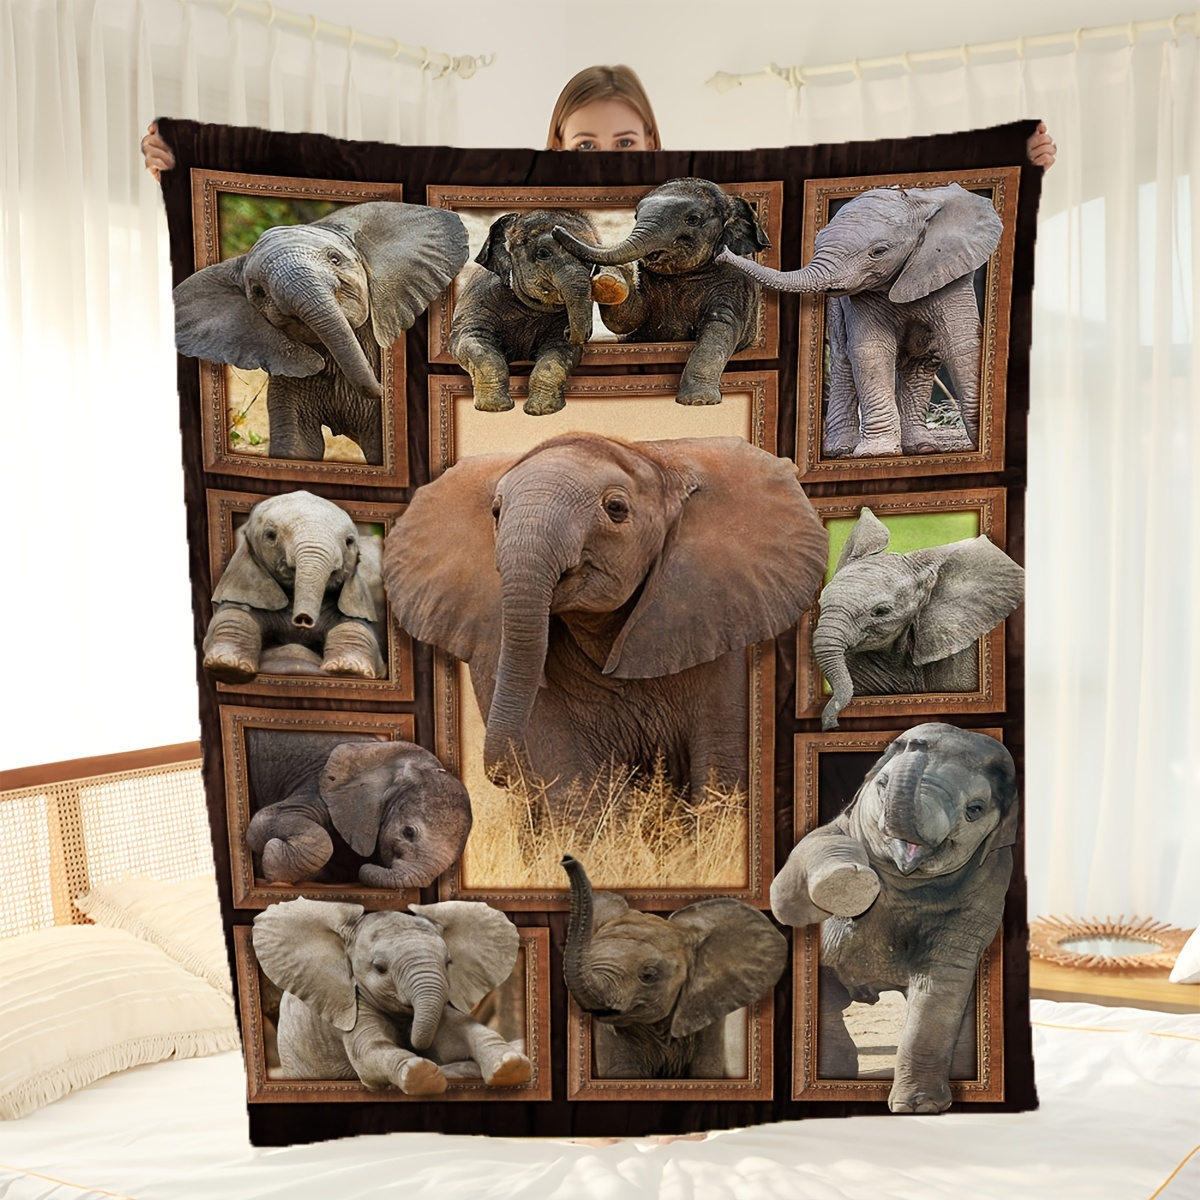 

1pc Super Soft Elephant Flannel Blanket - Perfect For All Seasons And Animal Decor - Ideal For Bed, Chair, Sofa, Bedroom, And Office